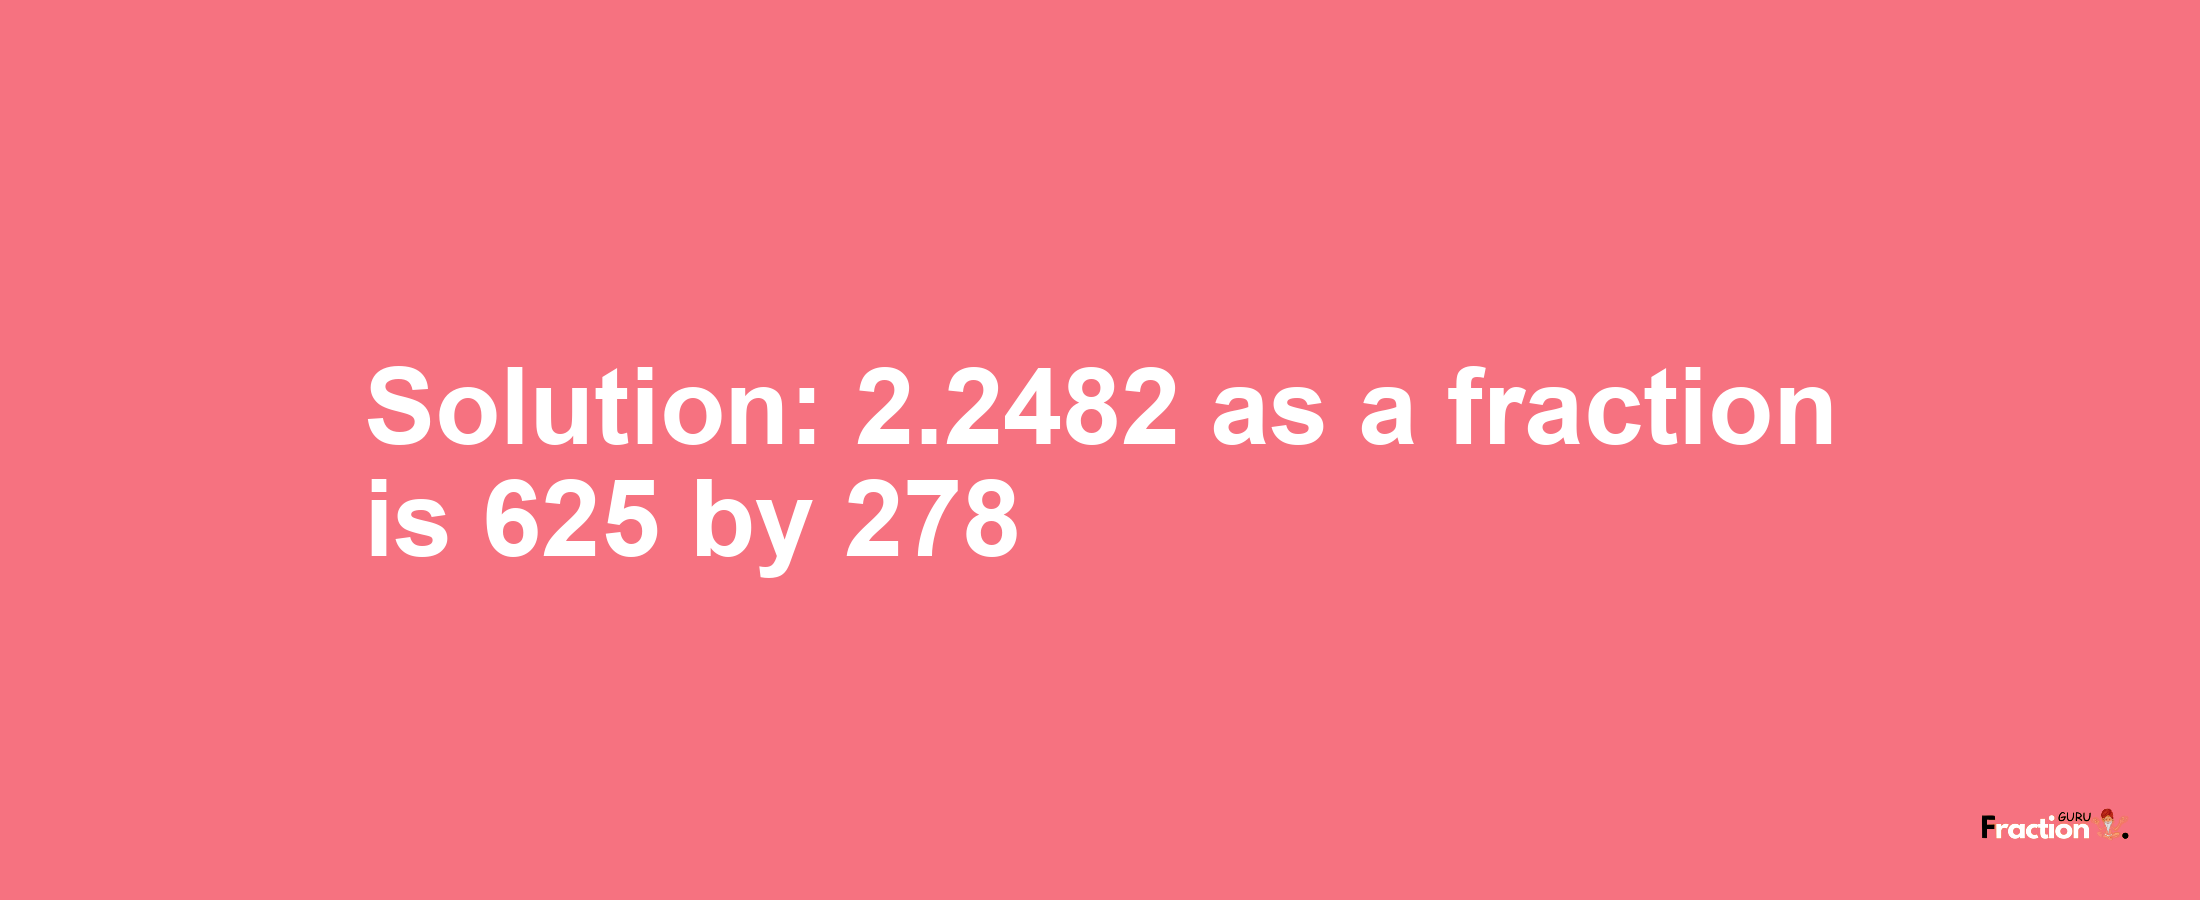 Solution:2.2482 as a fraction is 625/278